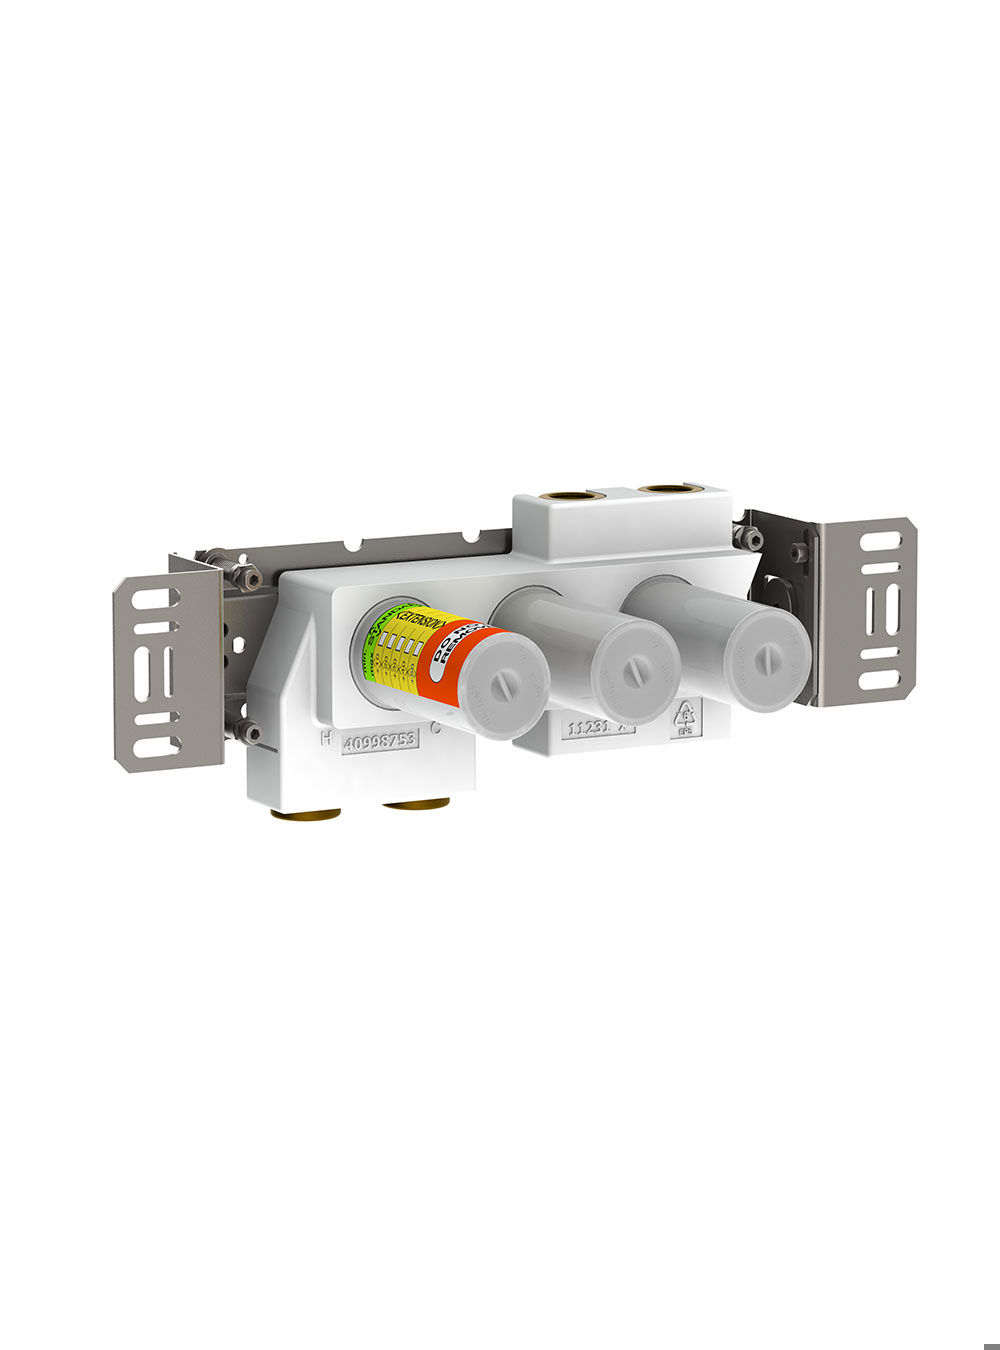 5400VA4: Thermostatic mixer with 4-way diverter.
¾" connection to copper, steel, iron or pex pipe Work.